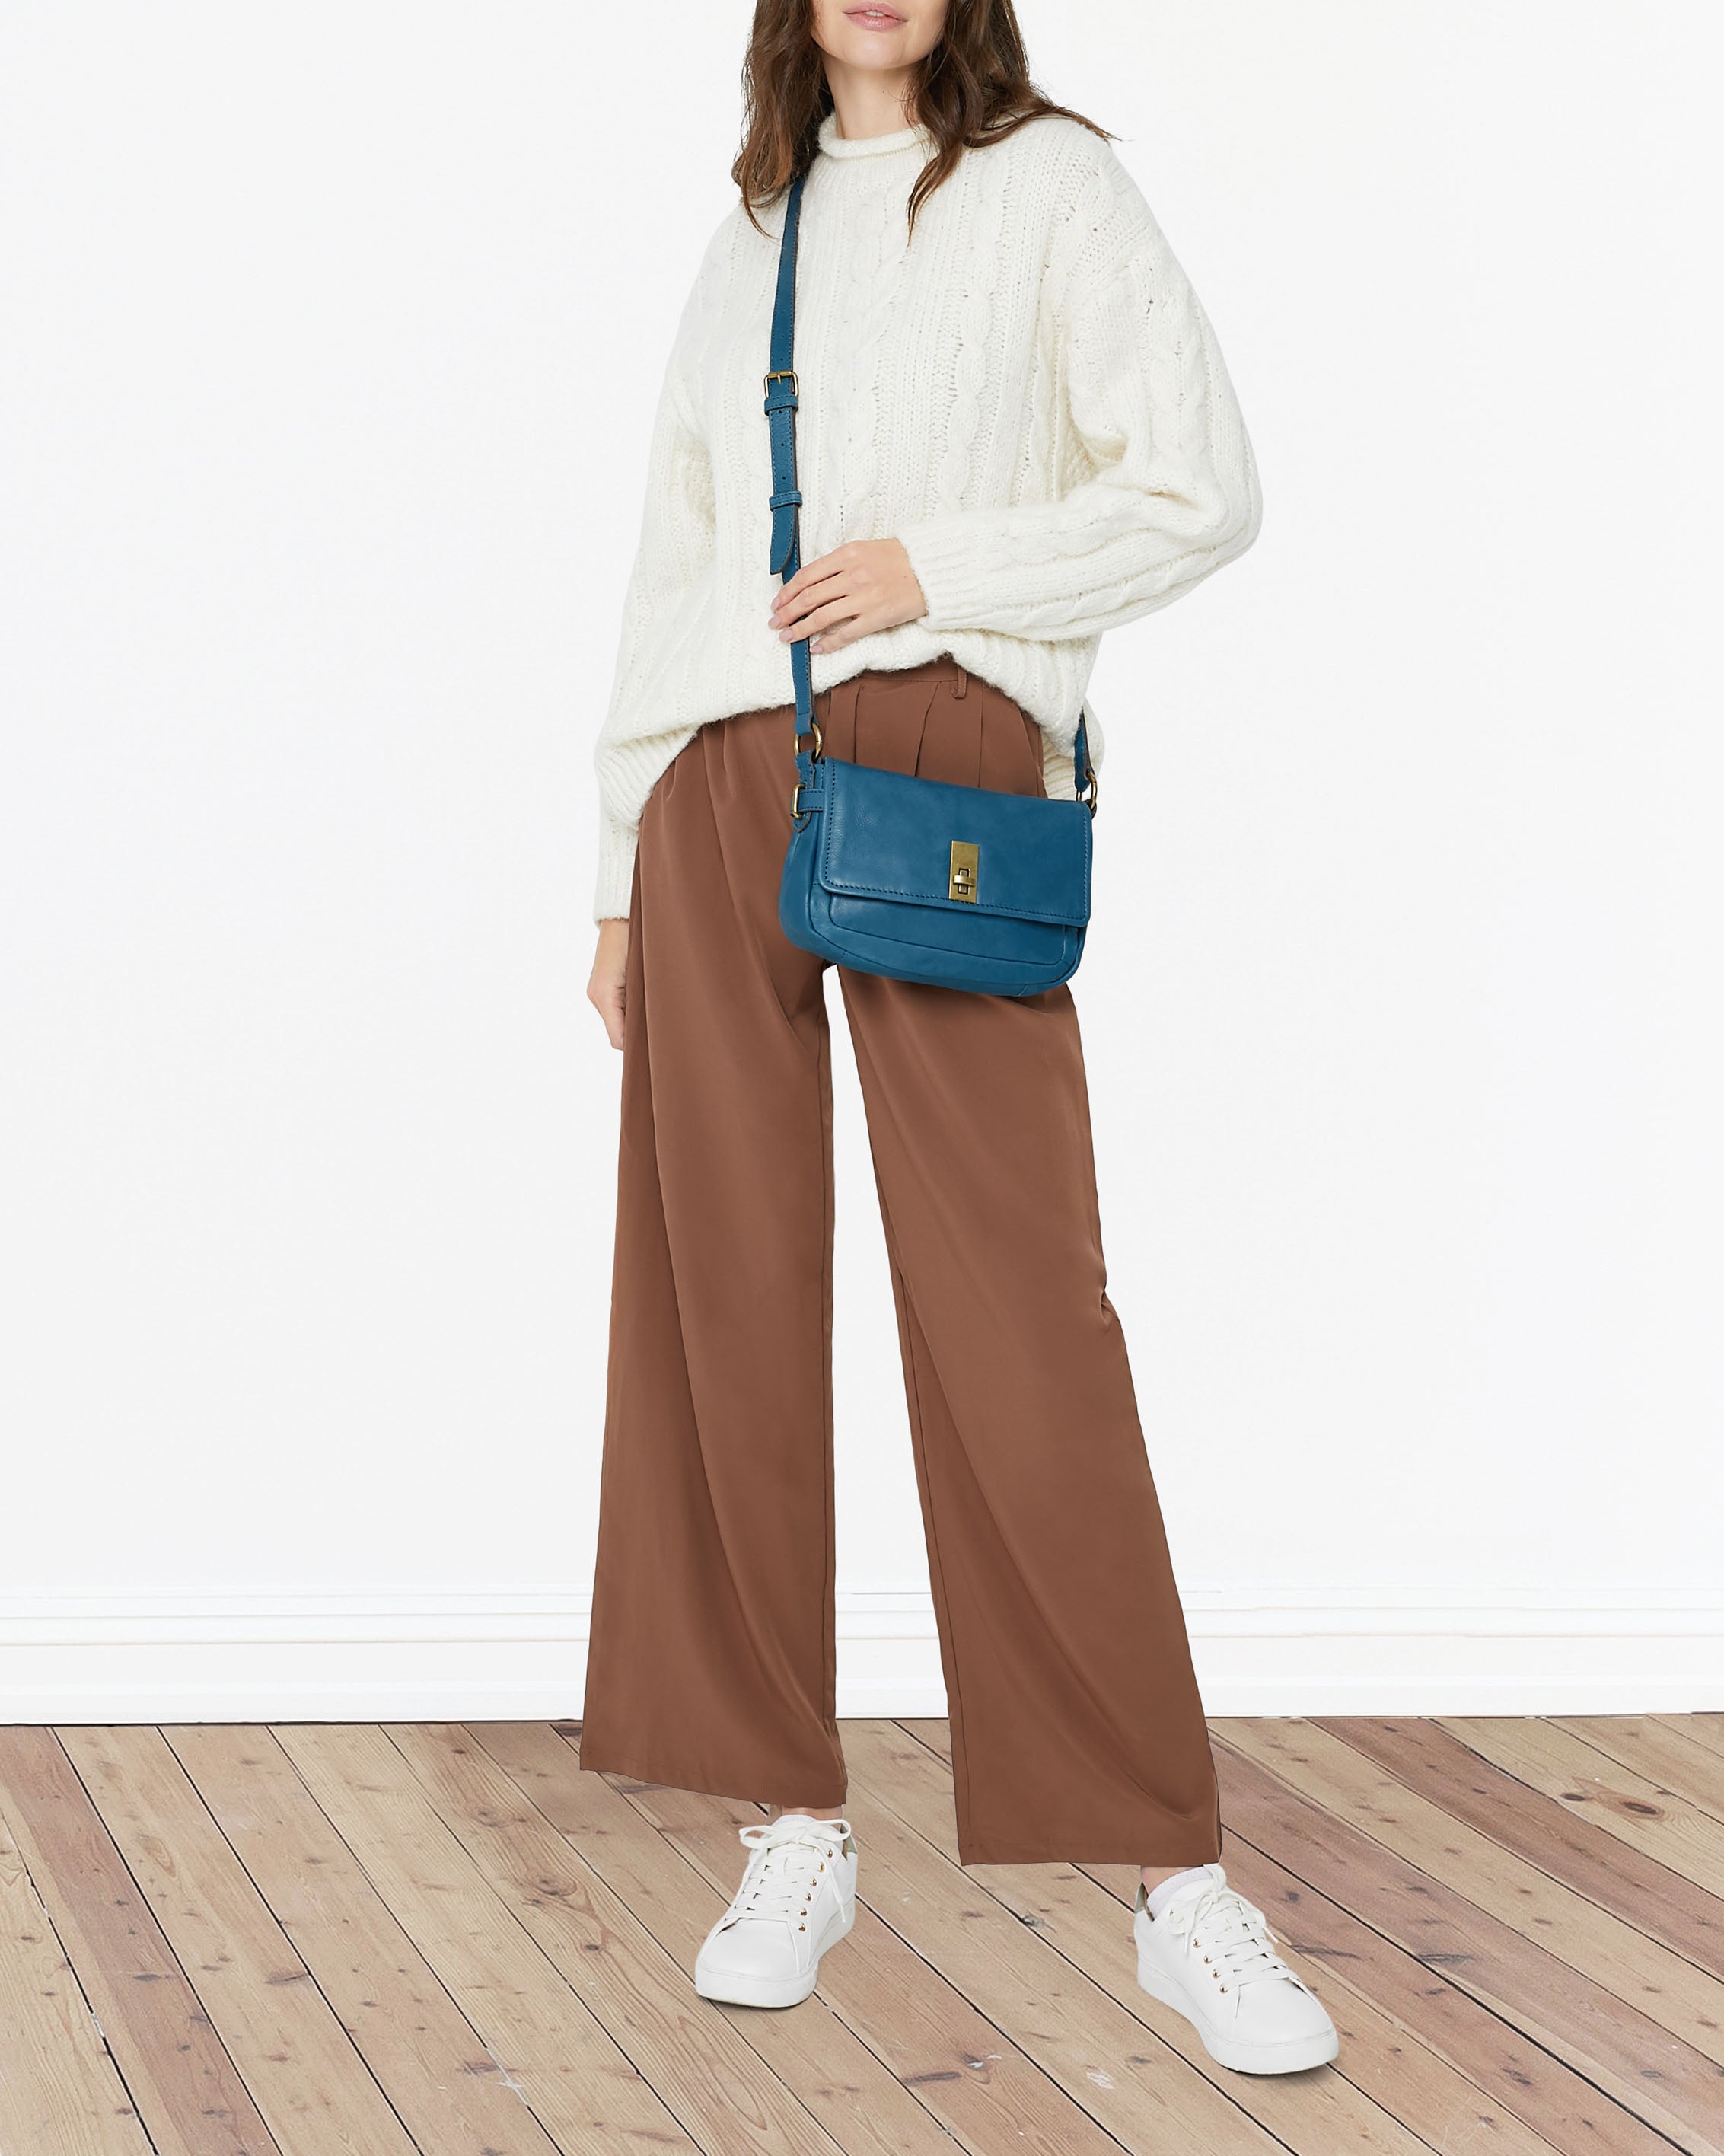 Carter Crossbody in Deep Turquoise | American Leather Co.